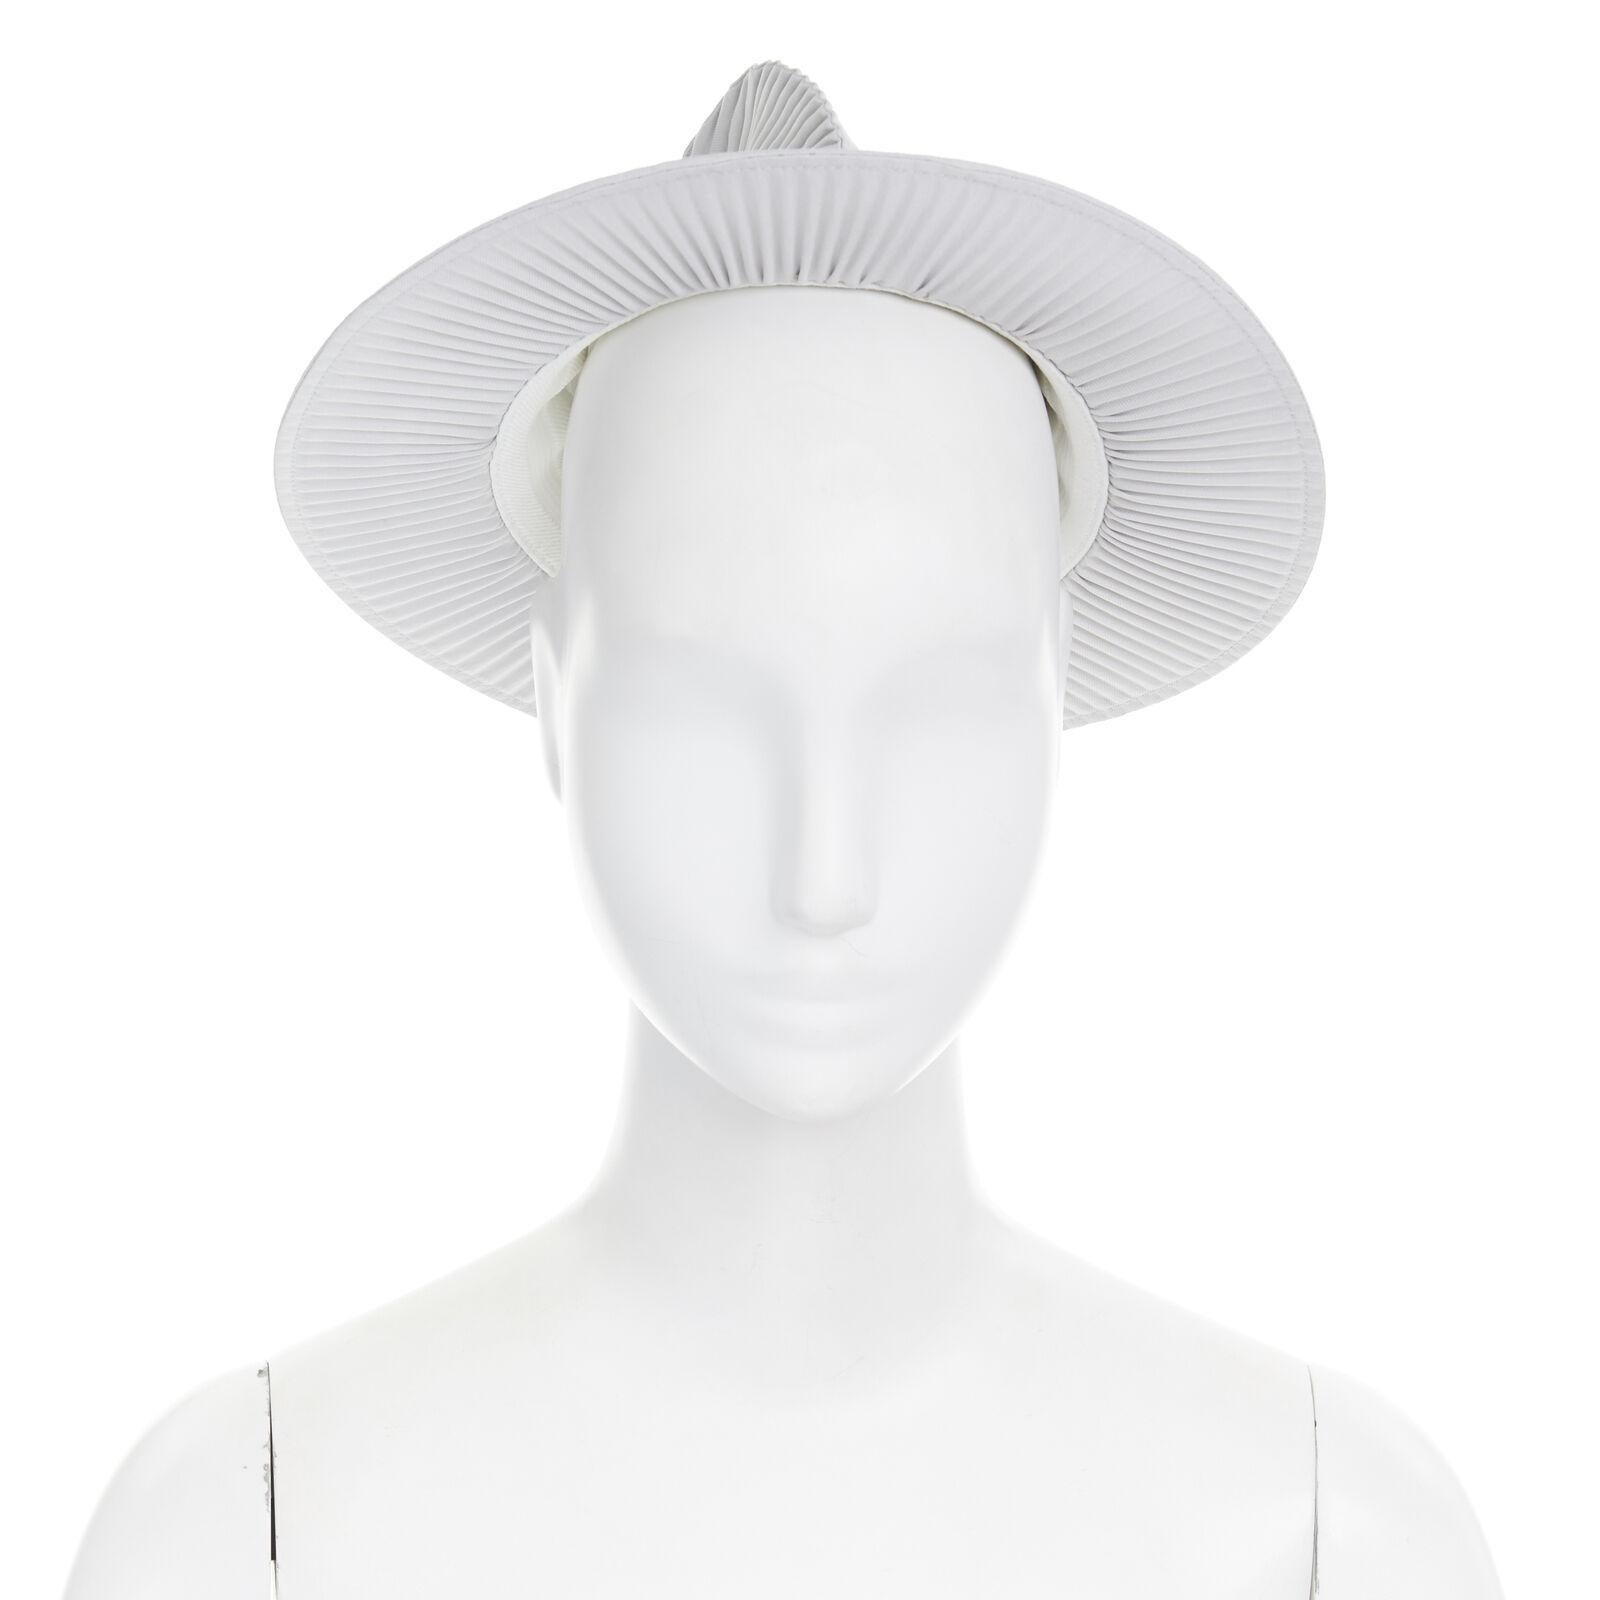 ISSEY MIYAKE PLEATS PLEASE light grey pleated wide brim statement boater hat 
Reference: TGAS/A02724 
Brand: Issey Miyake 
Material: Fabric 
Color: Grey 
Pattern: Solid 
Extra Detail: Signature pleated polyester. Light grey. Wide brim. Soft draped